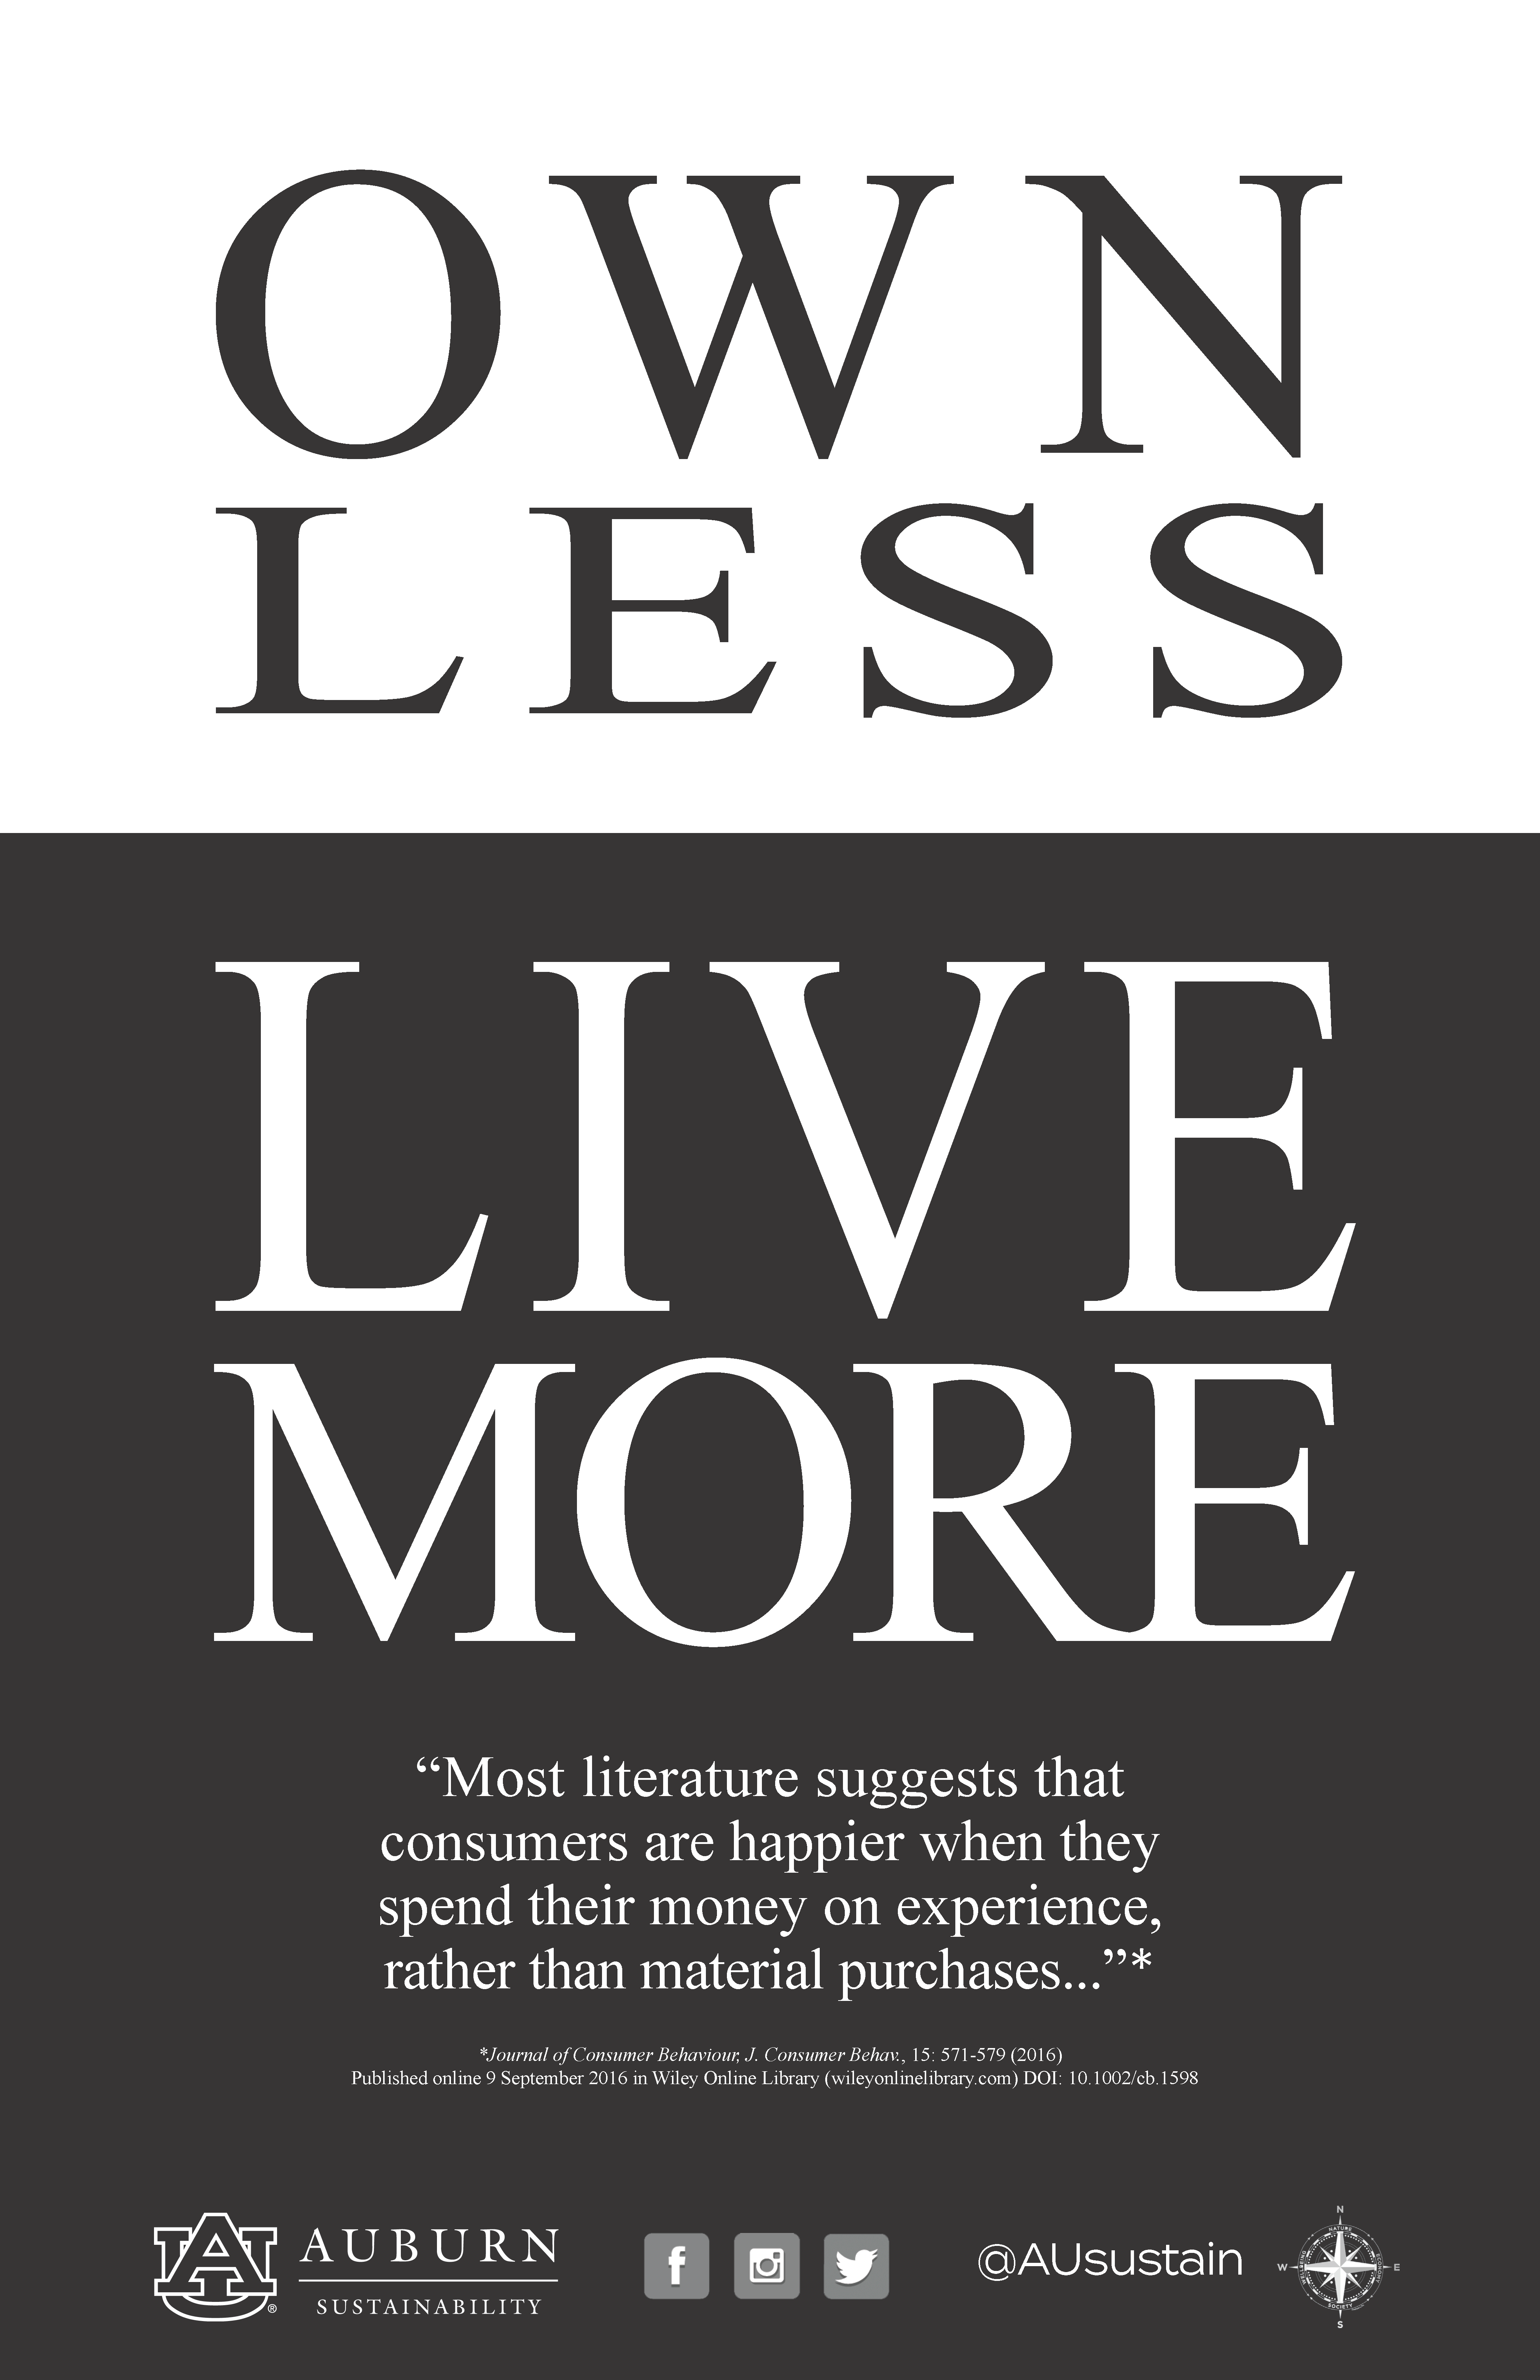 Image reading, "Own less; live more."